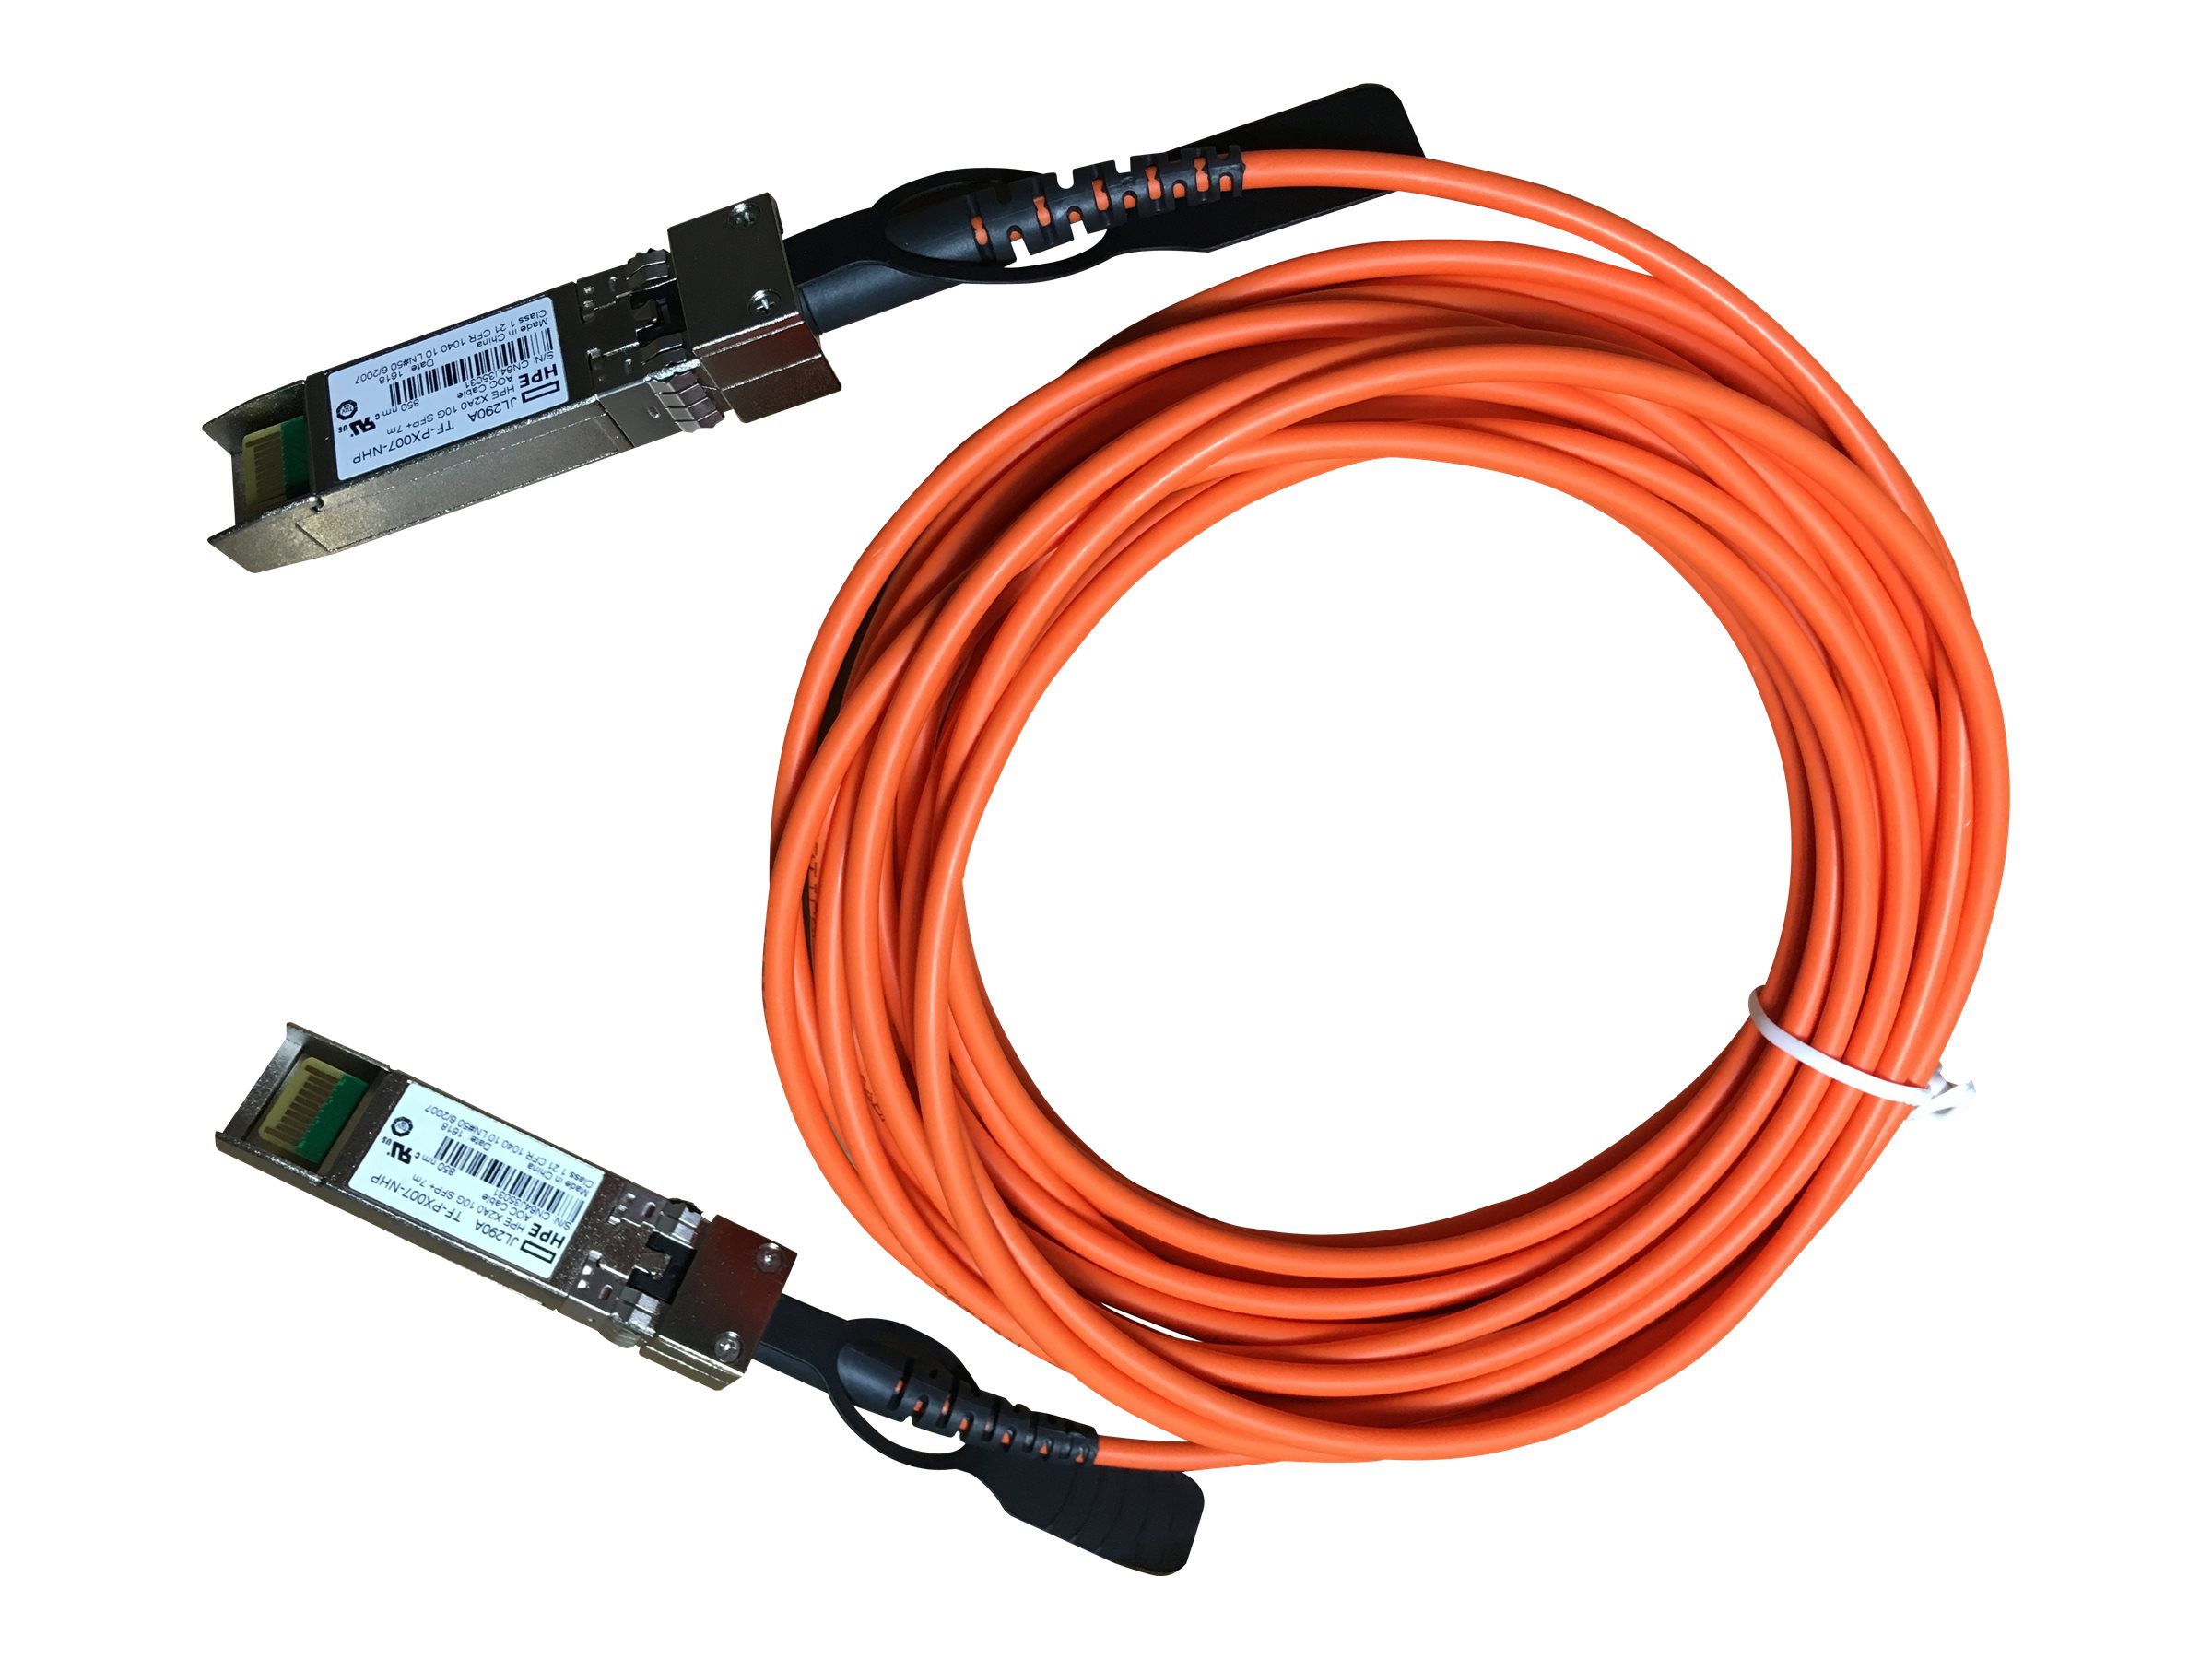 HPE X2A0 10G SFP+ 7m AOC Cable (JL290A)